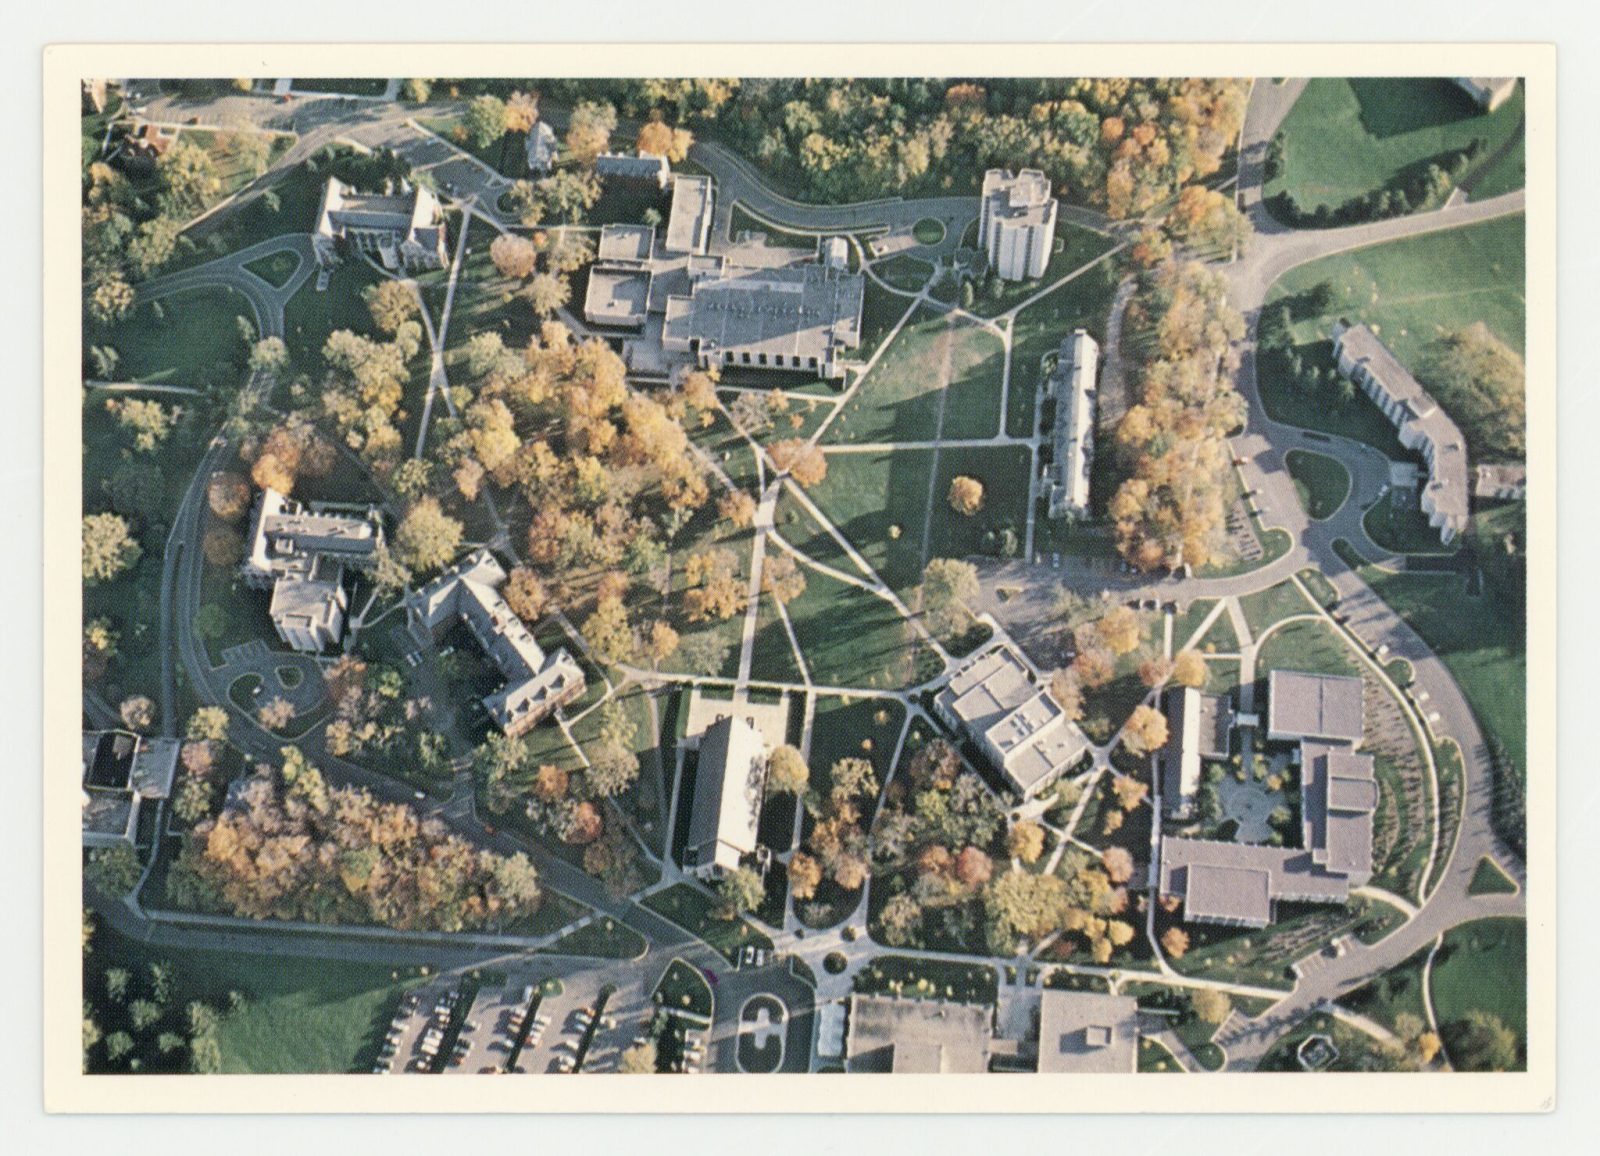 The center of St. Olaf College campus postcard